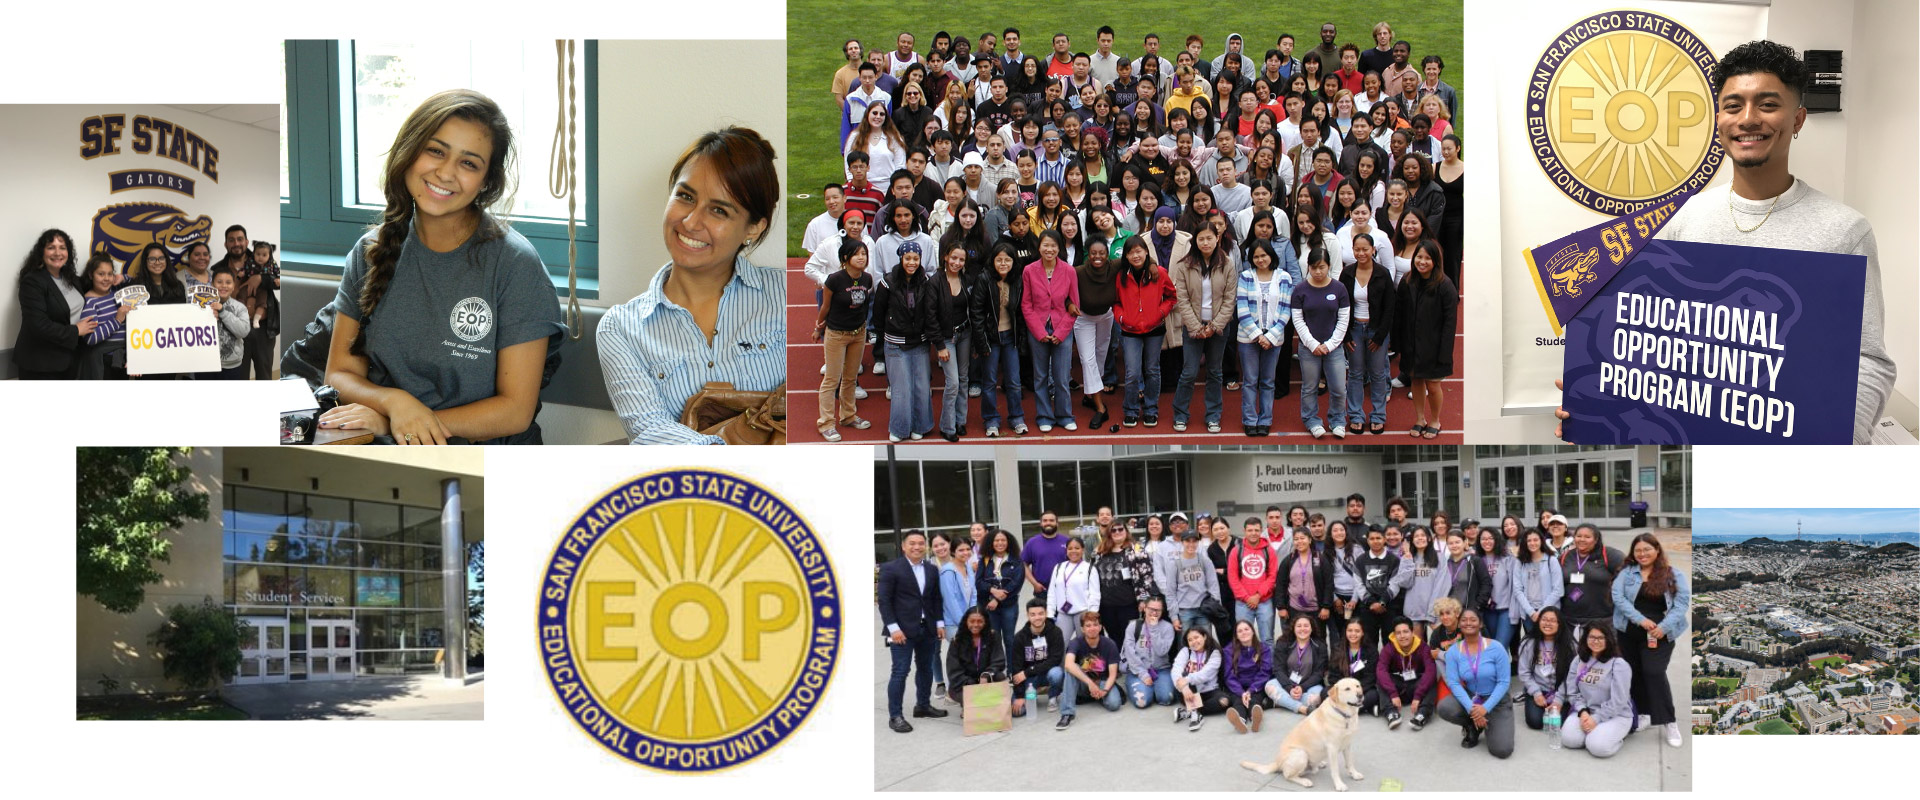 EOPP hero image - a collage of SF State students, staff and faculty, supporting educational opportunity program